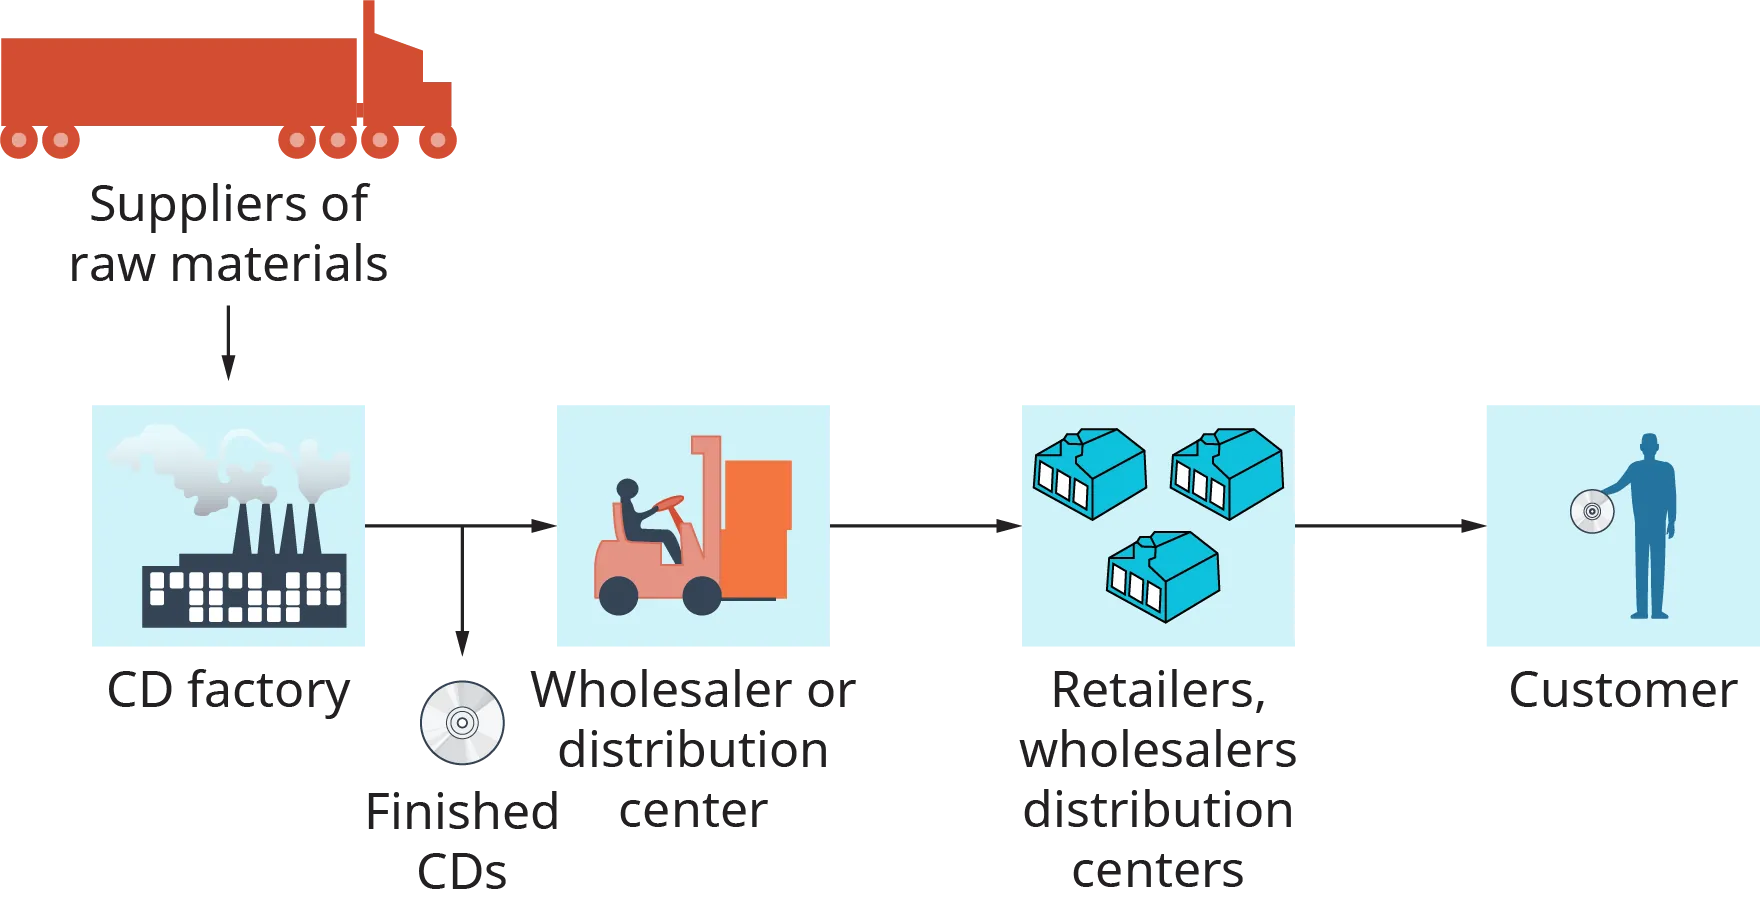 The illustration shows a large truck as a supplier of raw materials. These are passed to a C D factory. Finished C Ds are sent to a wholesaler or distribution center, and are then sent to retailers, wholesalers distribution centers, and then to the customer.